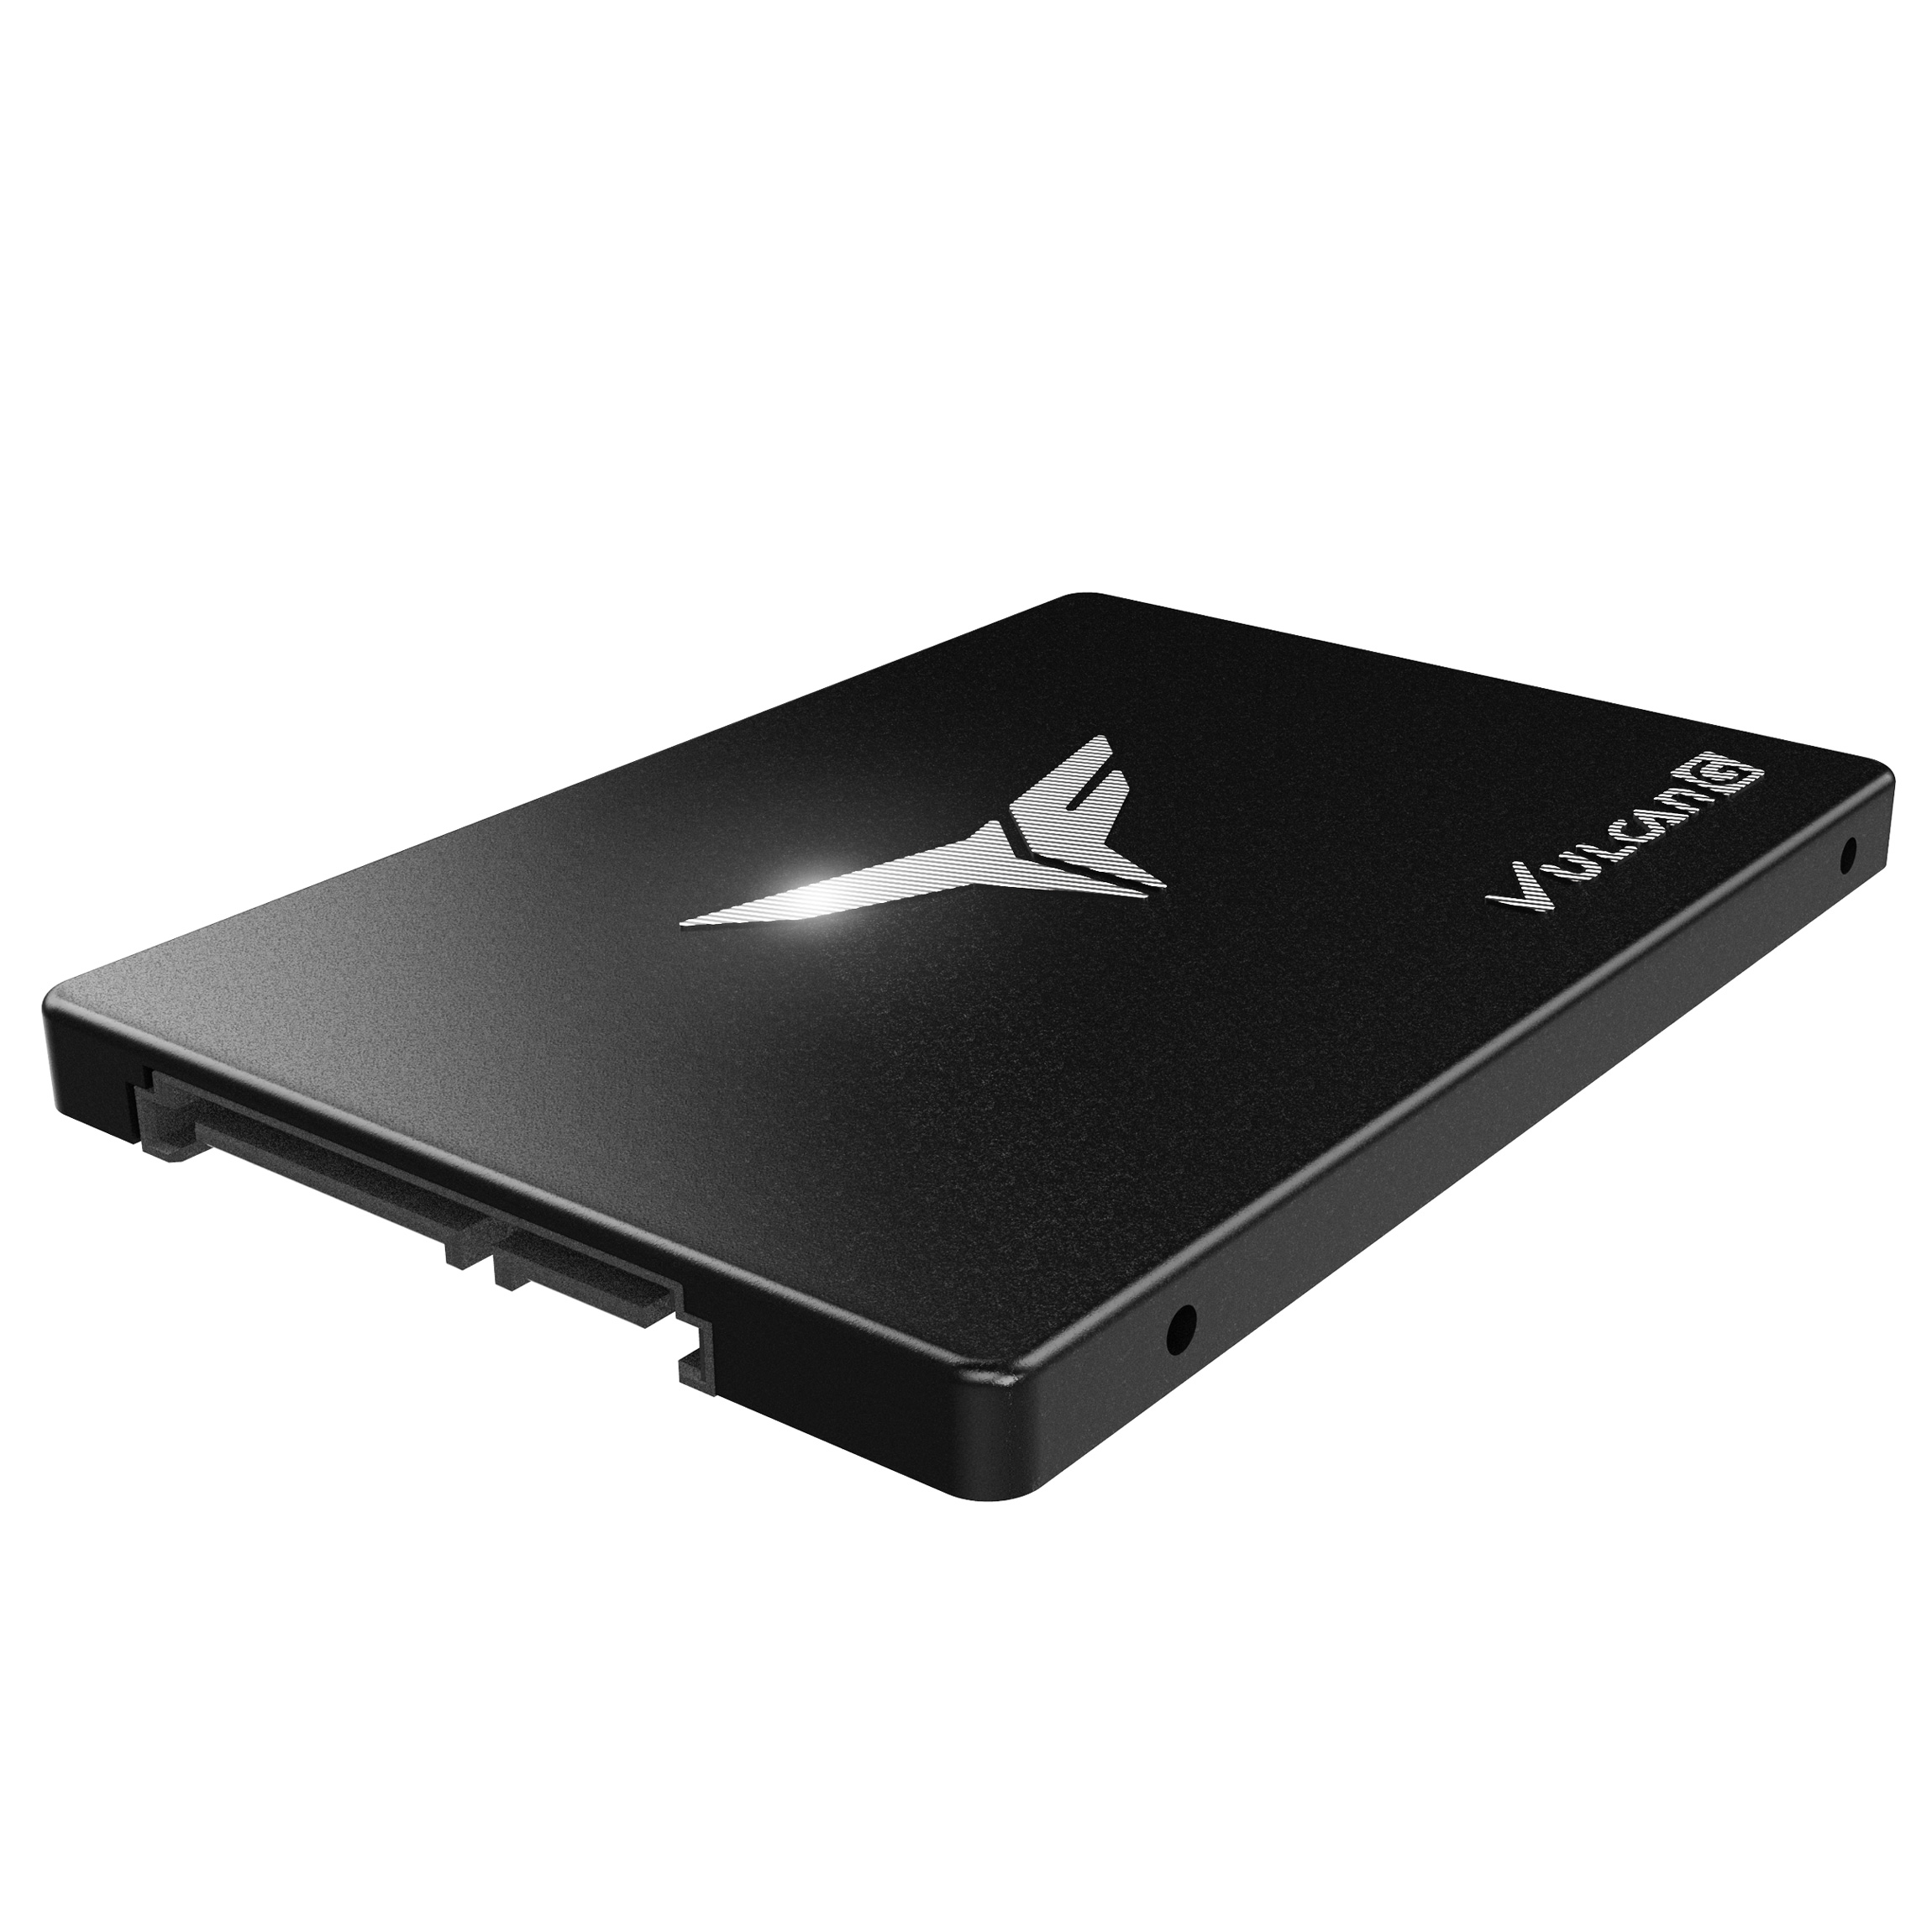 Team Group - TeamGroup 1TB Vulcan G SSD 2.5" SATA 6Gbps 3D NAND Solid State Drive